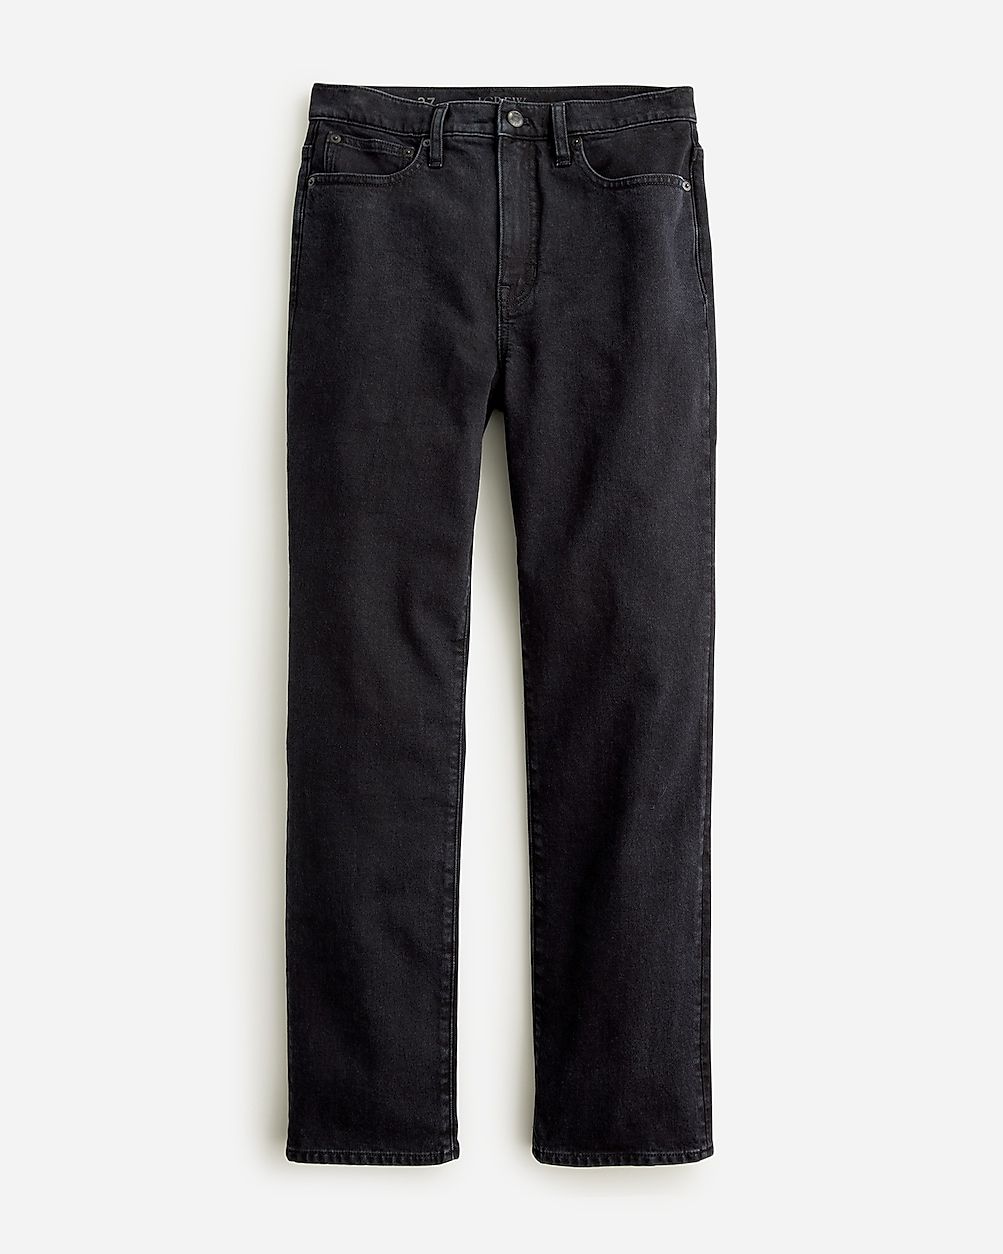 Classic straight jean in washed black | J.Crew US